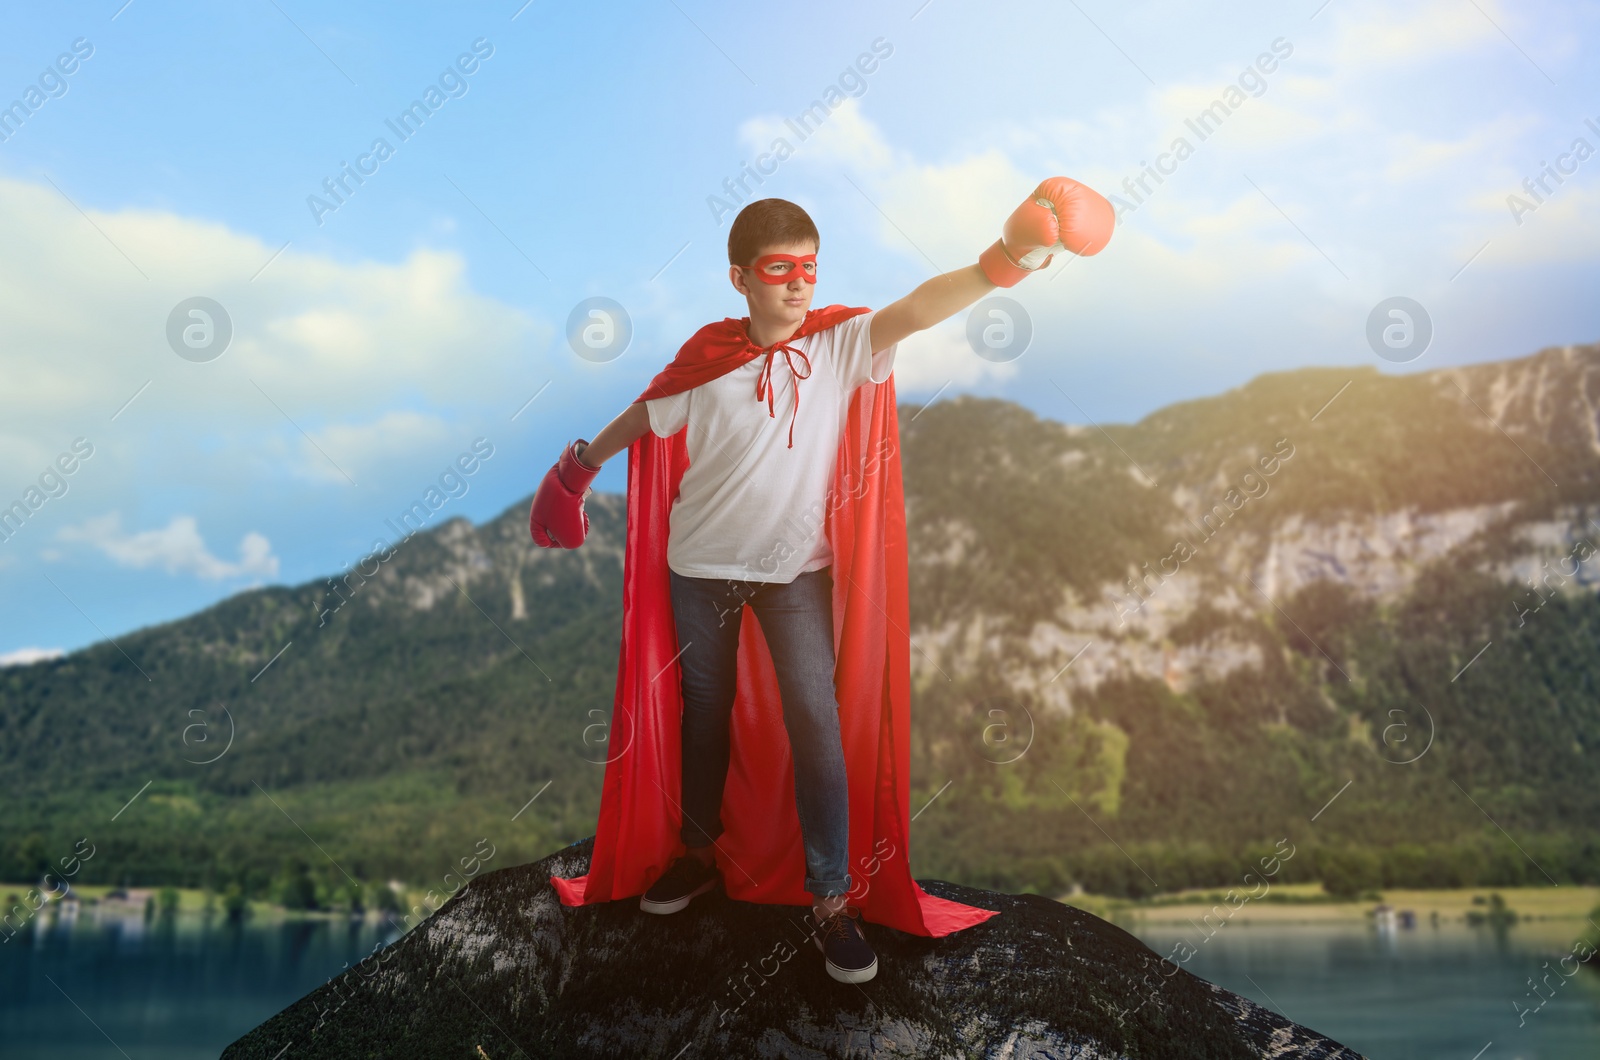 Image of Superhero, motivation and power. Boy in cape and mask wearing boxing gloves on high top in mountains